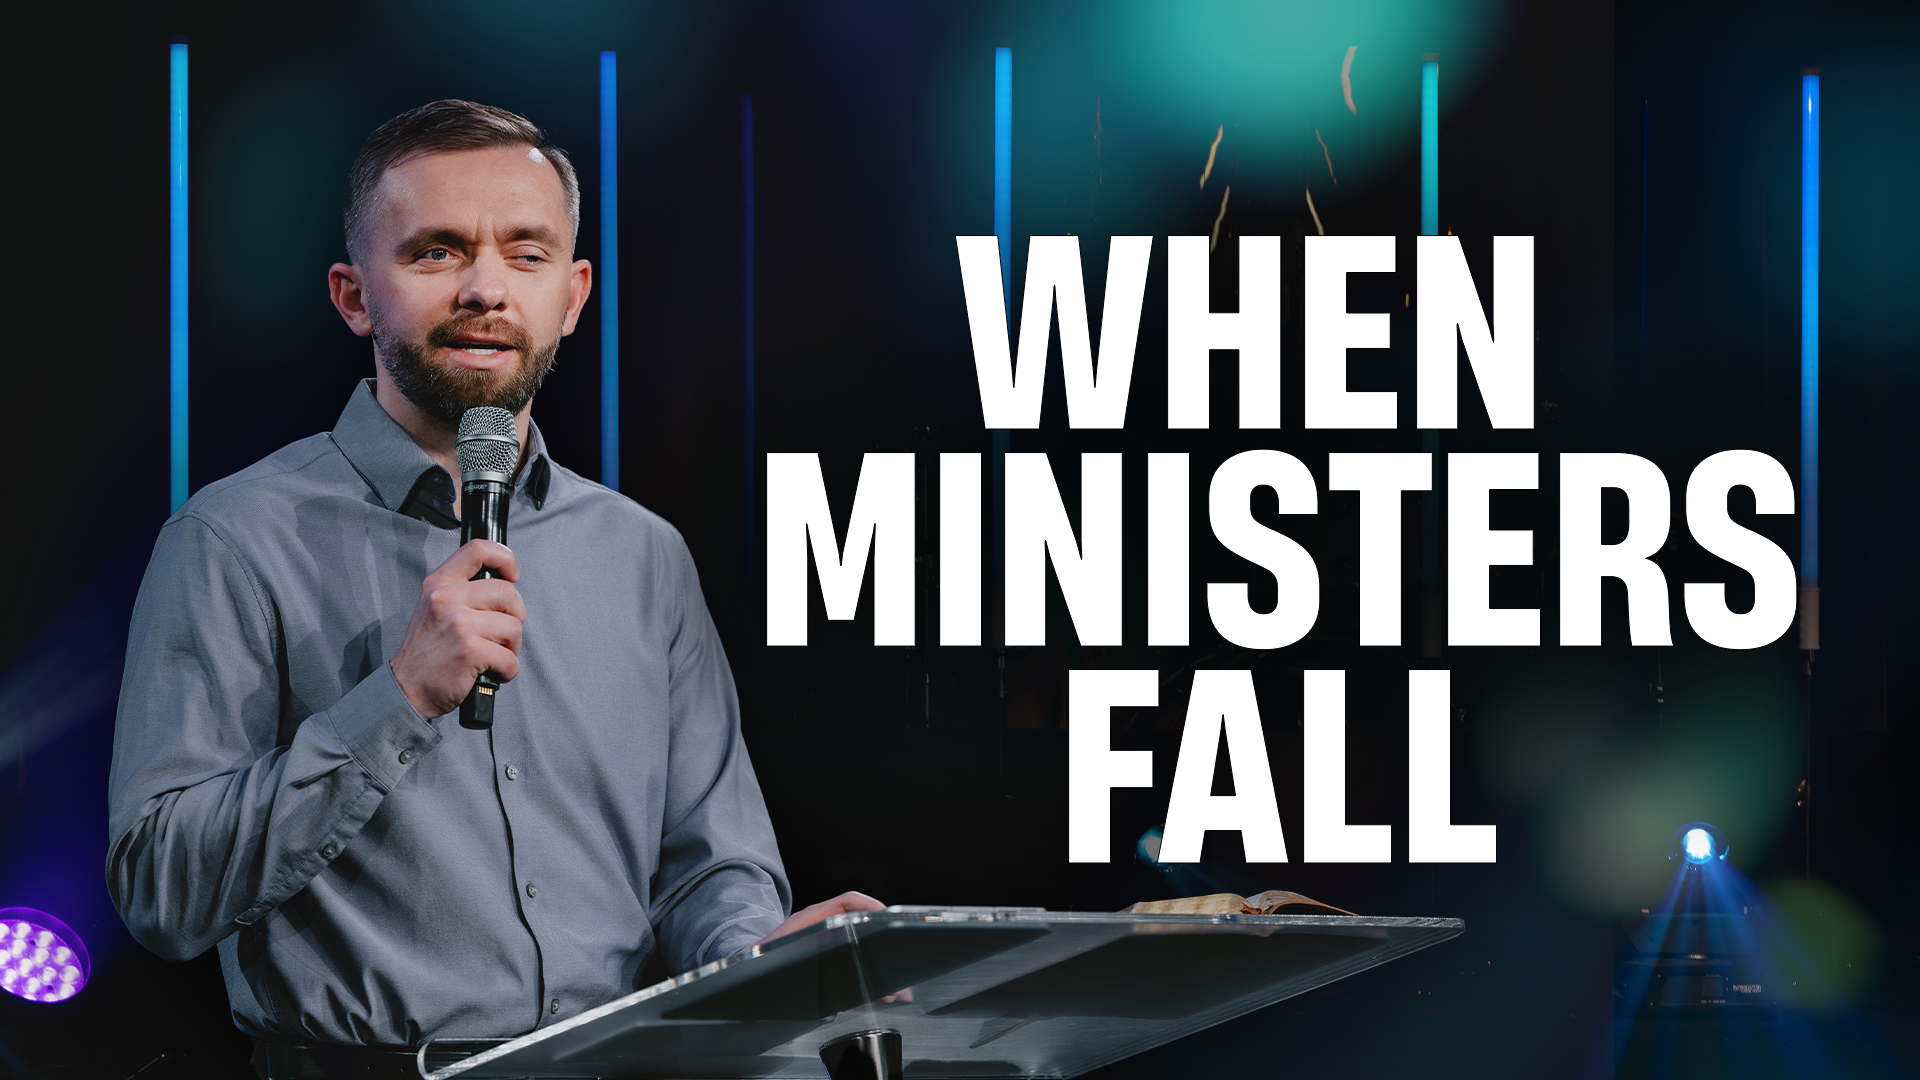 Featured Image for “When Ministers Fall ”